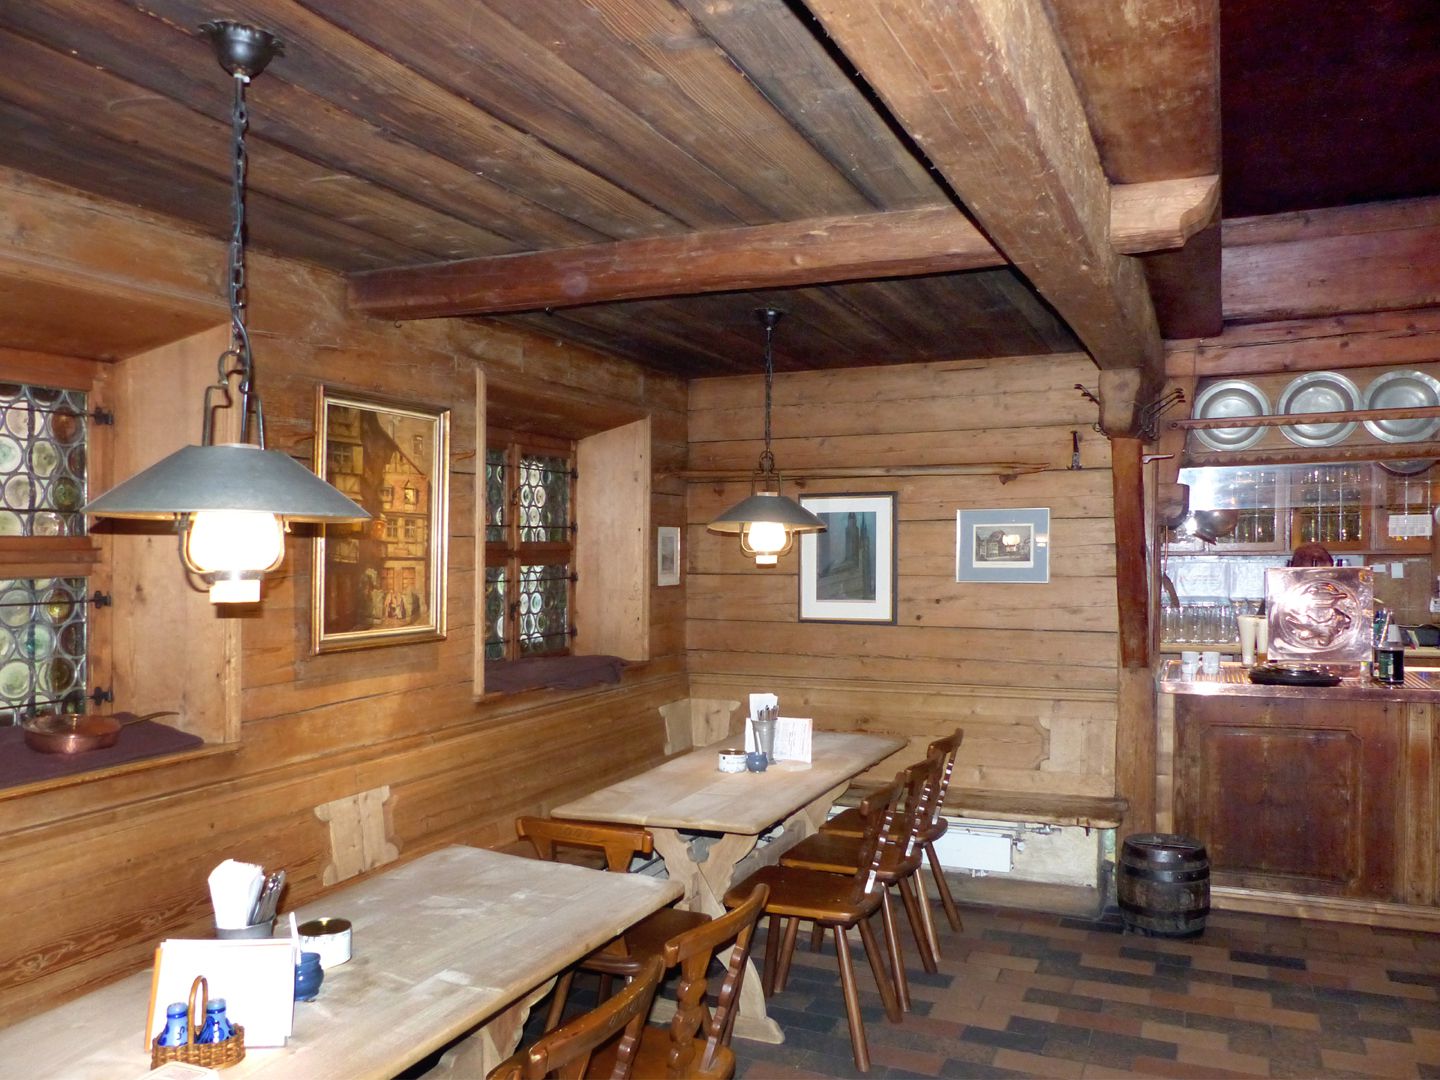 Bratwursthäusle Interior with view towards the bar